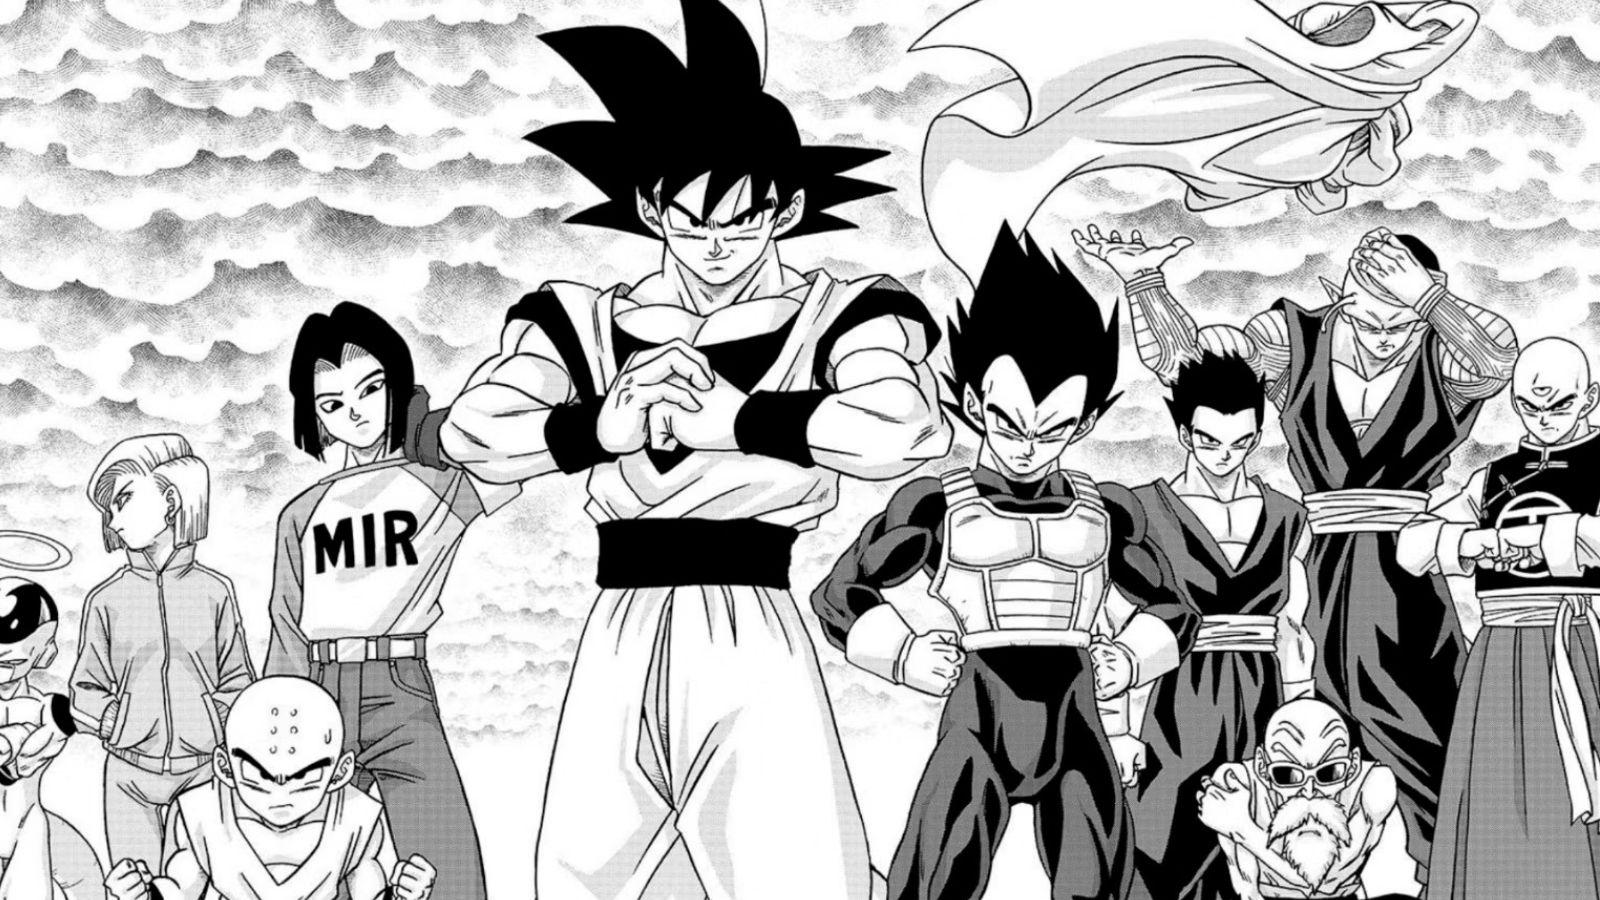 When Do New Dragon Ball Super Manga Chapters Come Out?